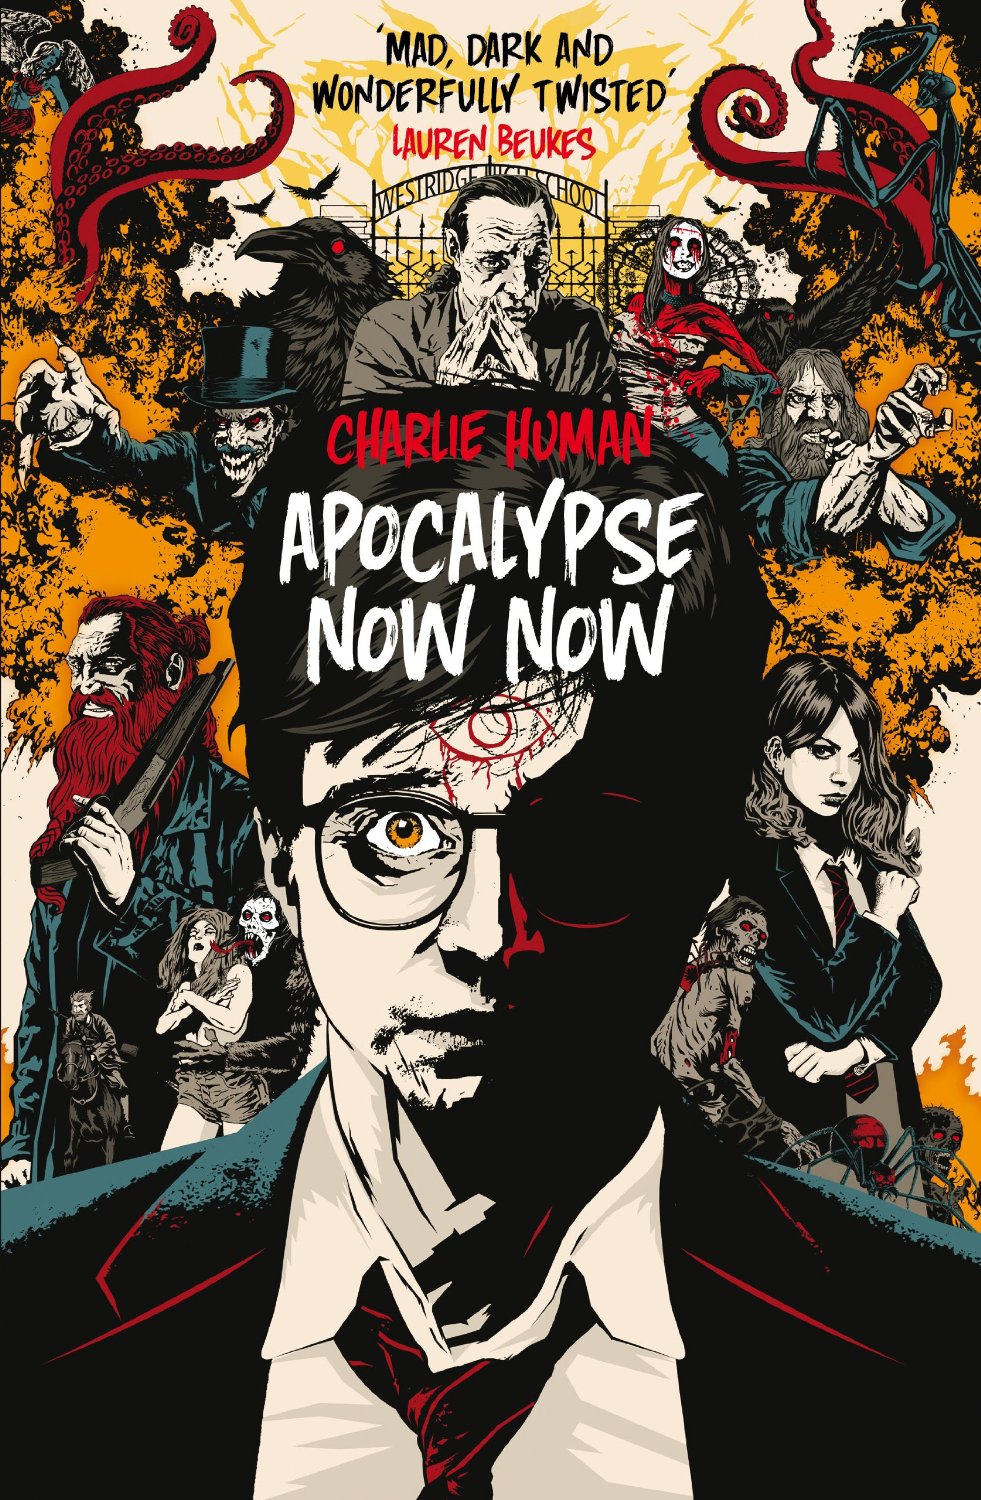 boom book reviews - Apocalypse Now Now by Charlie Human